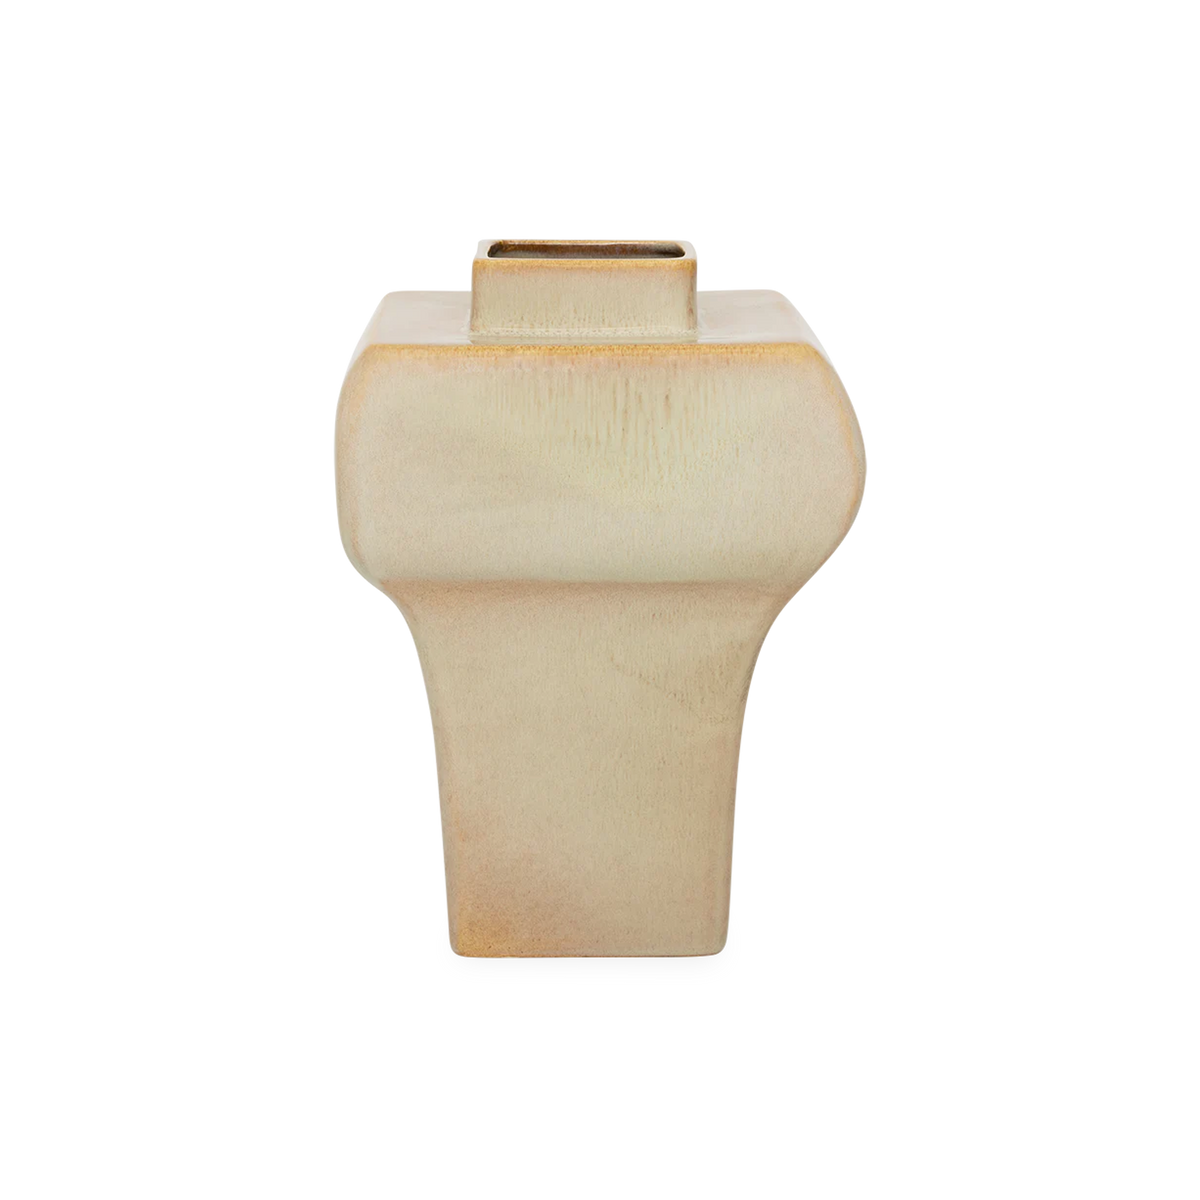 Carefully hand crafted and finished with a natural reactive glaze, the Square Tapered Vase features a softly tapered pedestal base that leads to a square body.